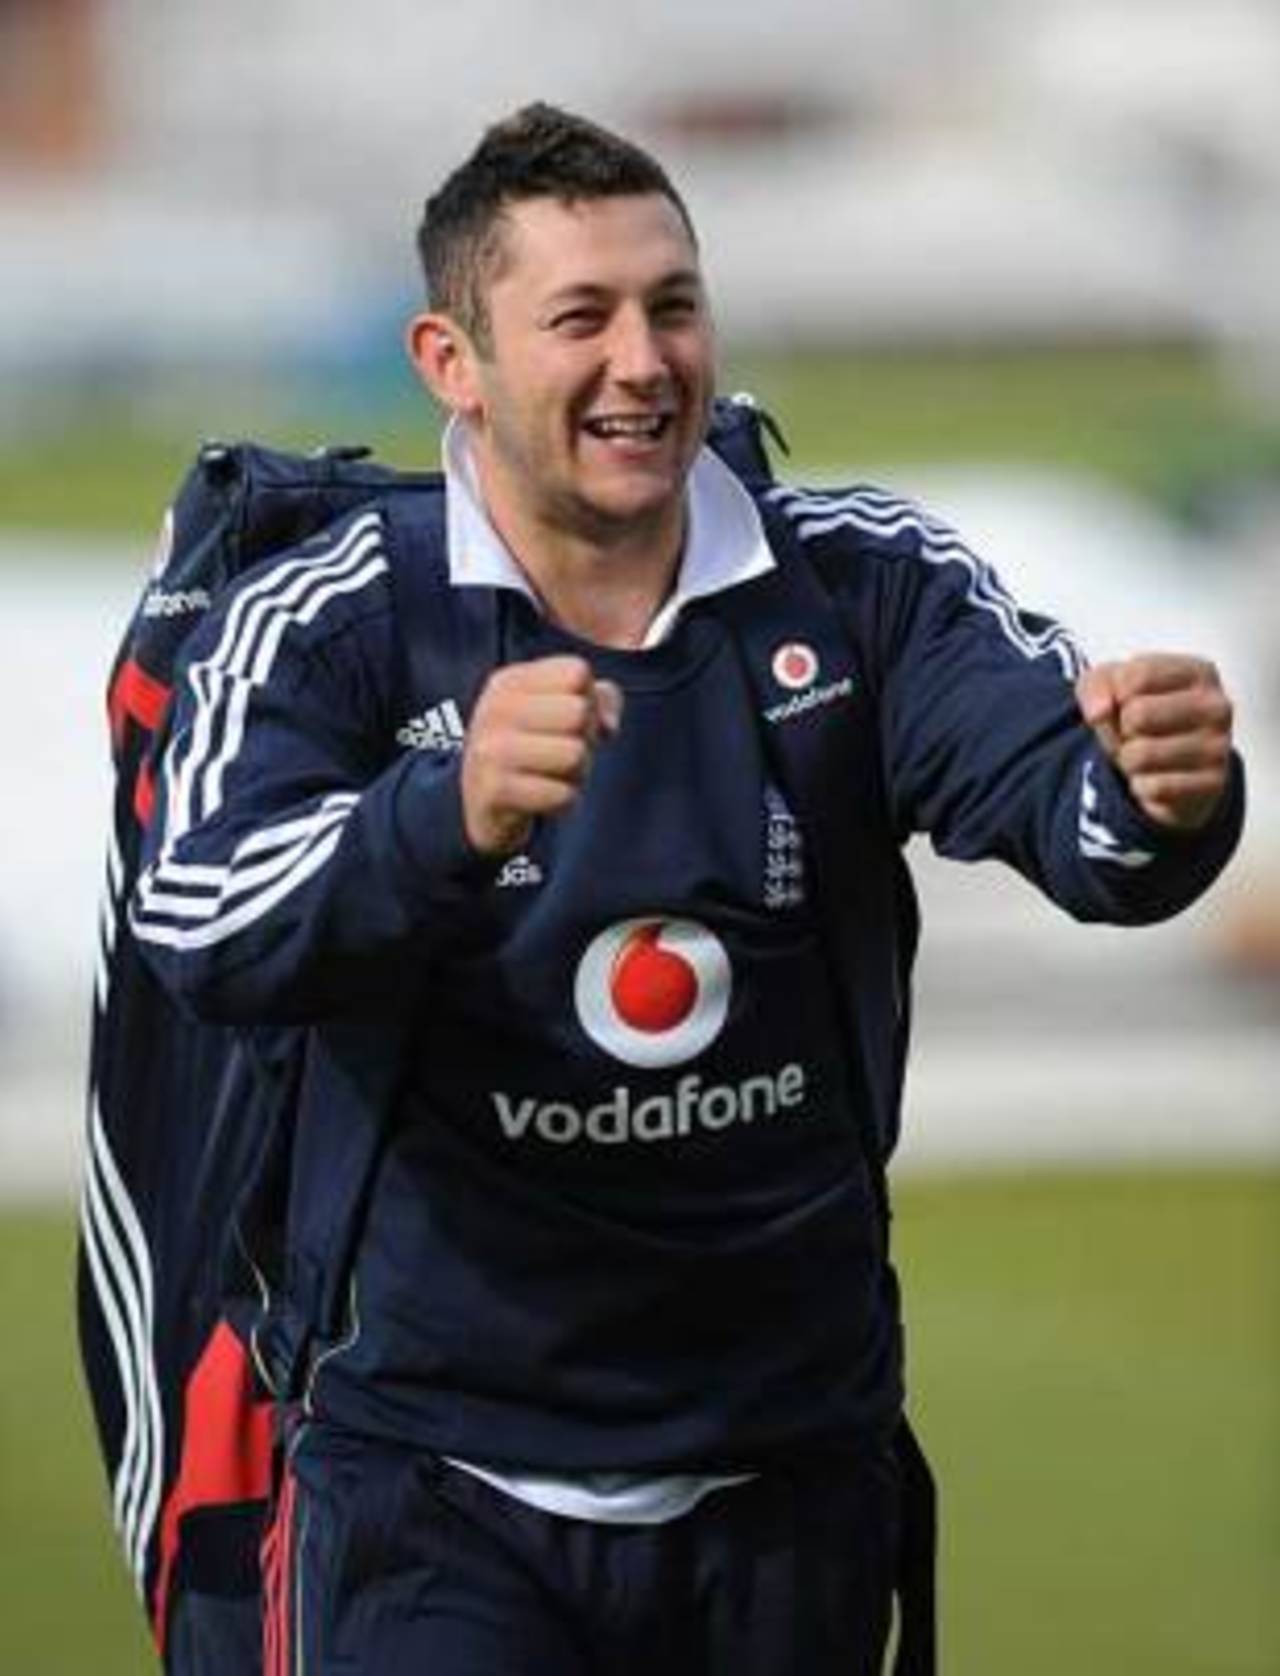 Tim Bresnan is clearly excited on his first day with the England squad, West Indies v England, 1st Test, Lord's, May 5, 2009